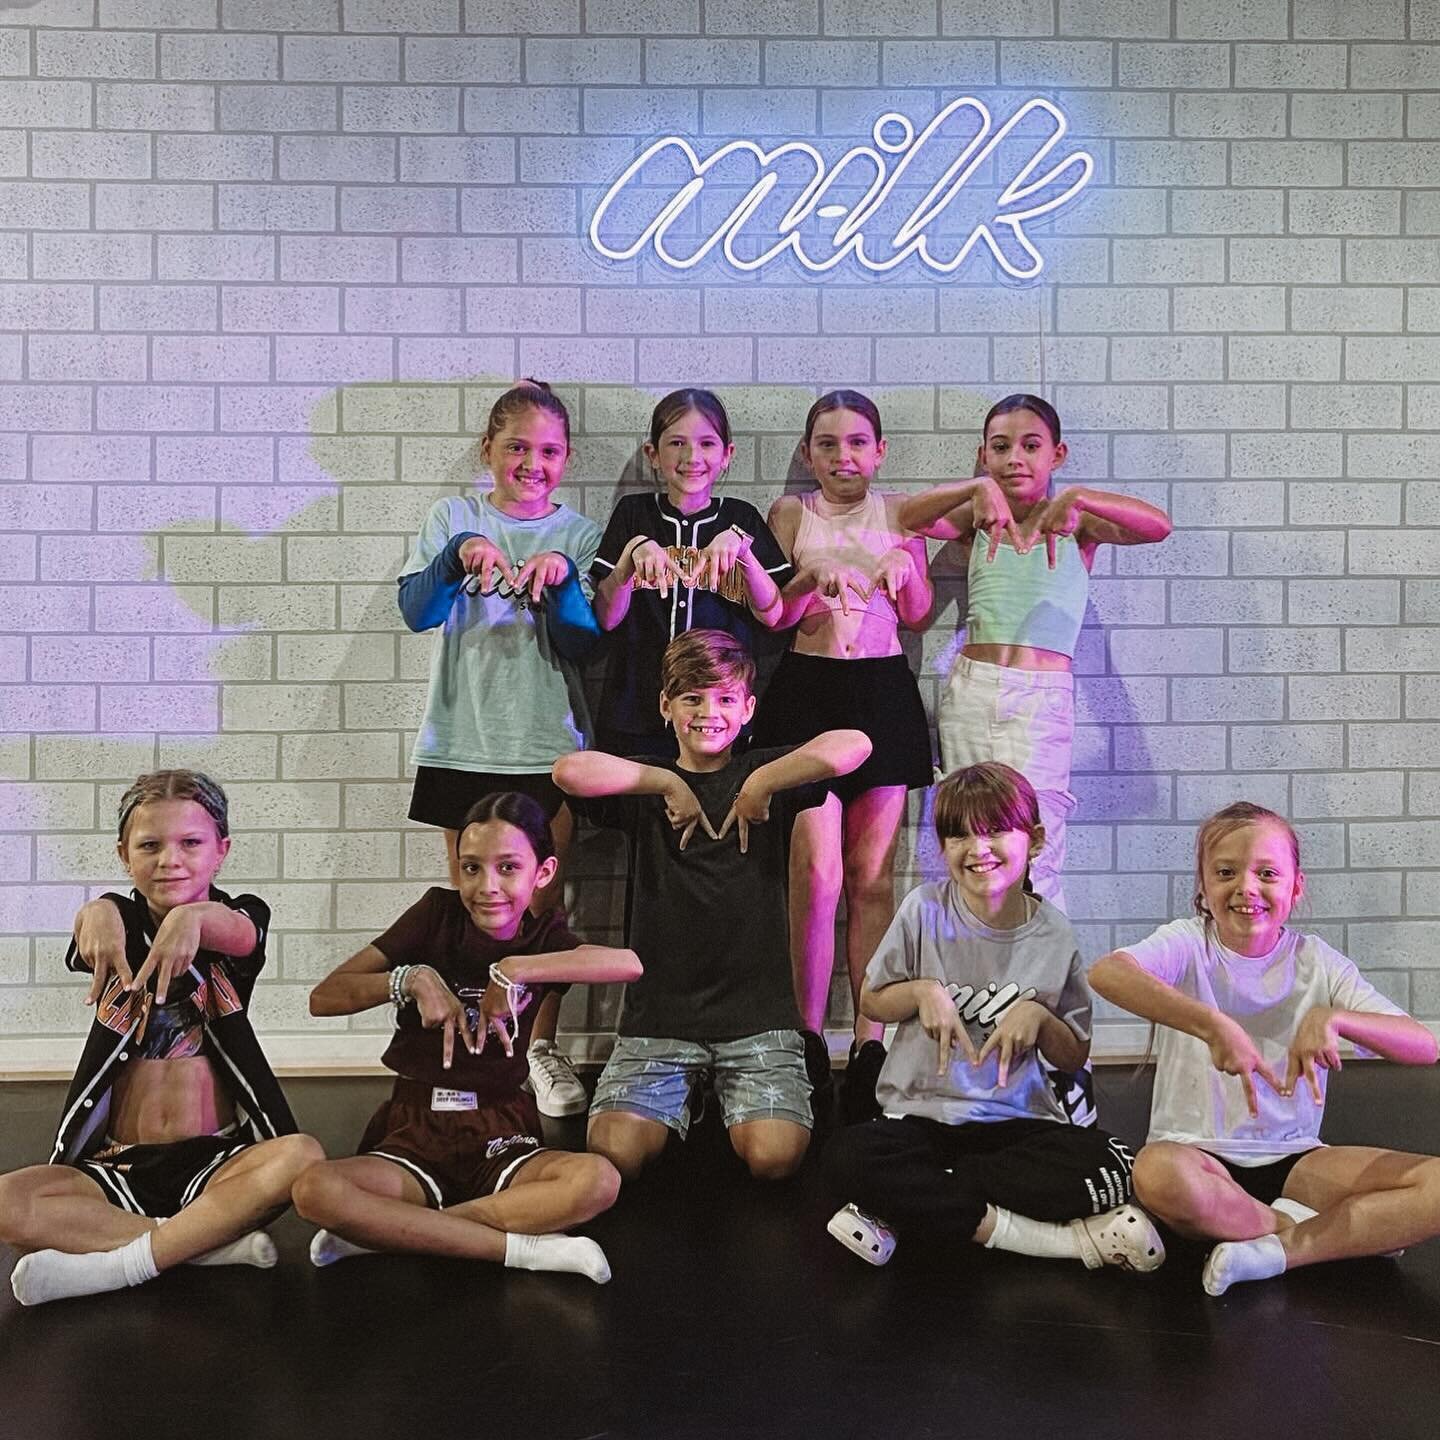 Introducing our 2024 kids crew HONEY 🍯 🐝💛⭐️🌙🌻

New team incoming for this year comp szn! 
We are so excited to watch their journey this year with their amazing leader @georgie.price !! 🥛